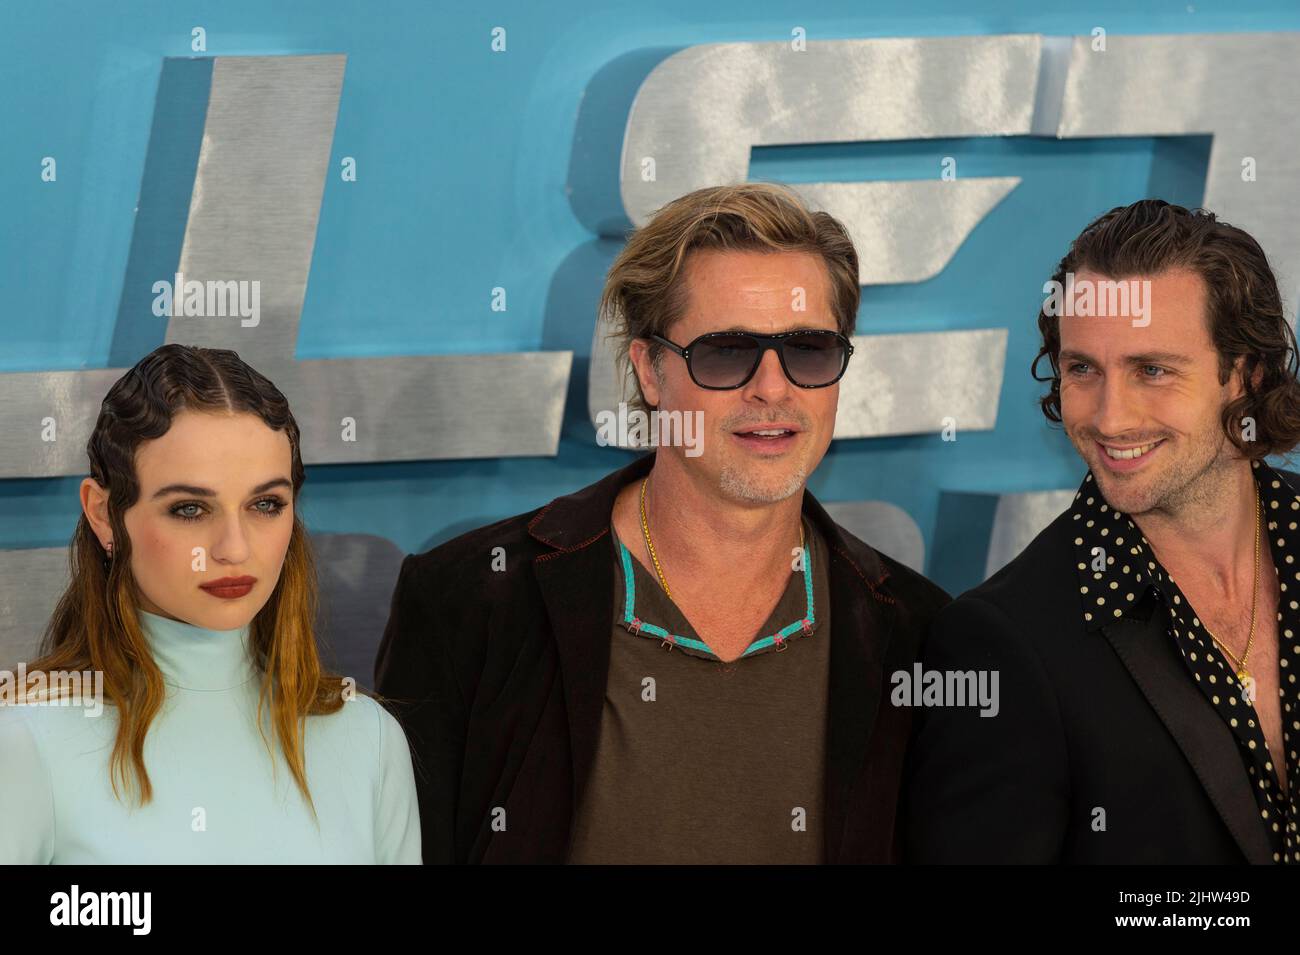 London, UK. 20 July 2022. Cast members (L to R) Joey King, Brad Pitt and Aaron Taylor-Johnson attend the UK gala screening of the movie ‘Bullet Train’ at Cineworld Leicester Square.  Credit: Stephen Chung / Alamy Live News Stock Photo